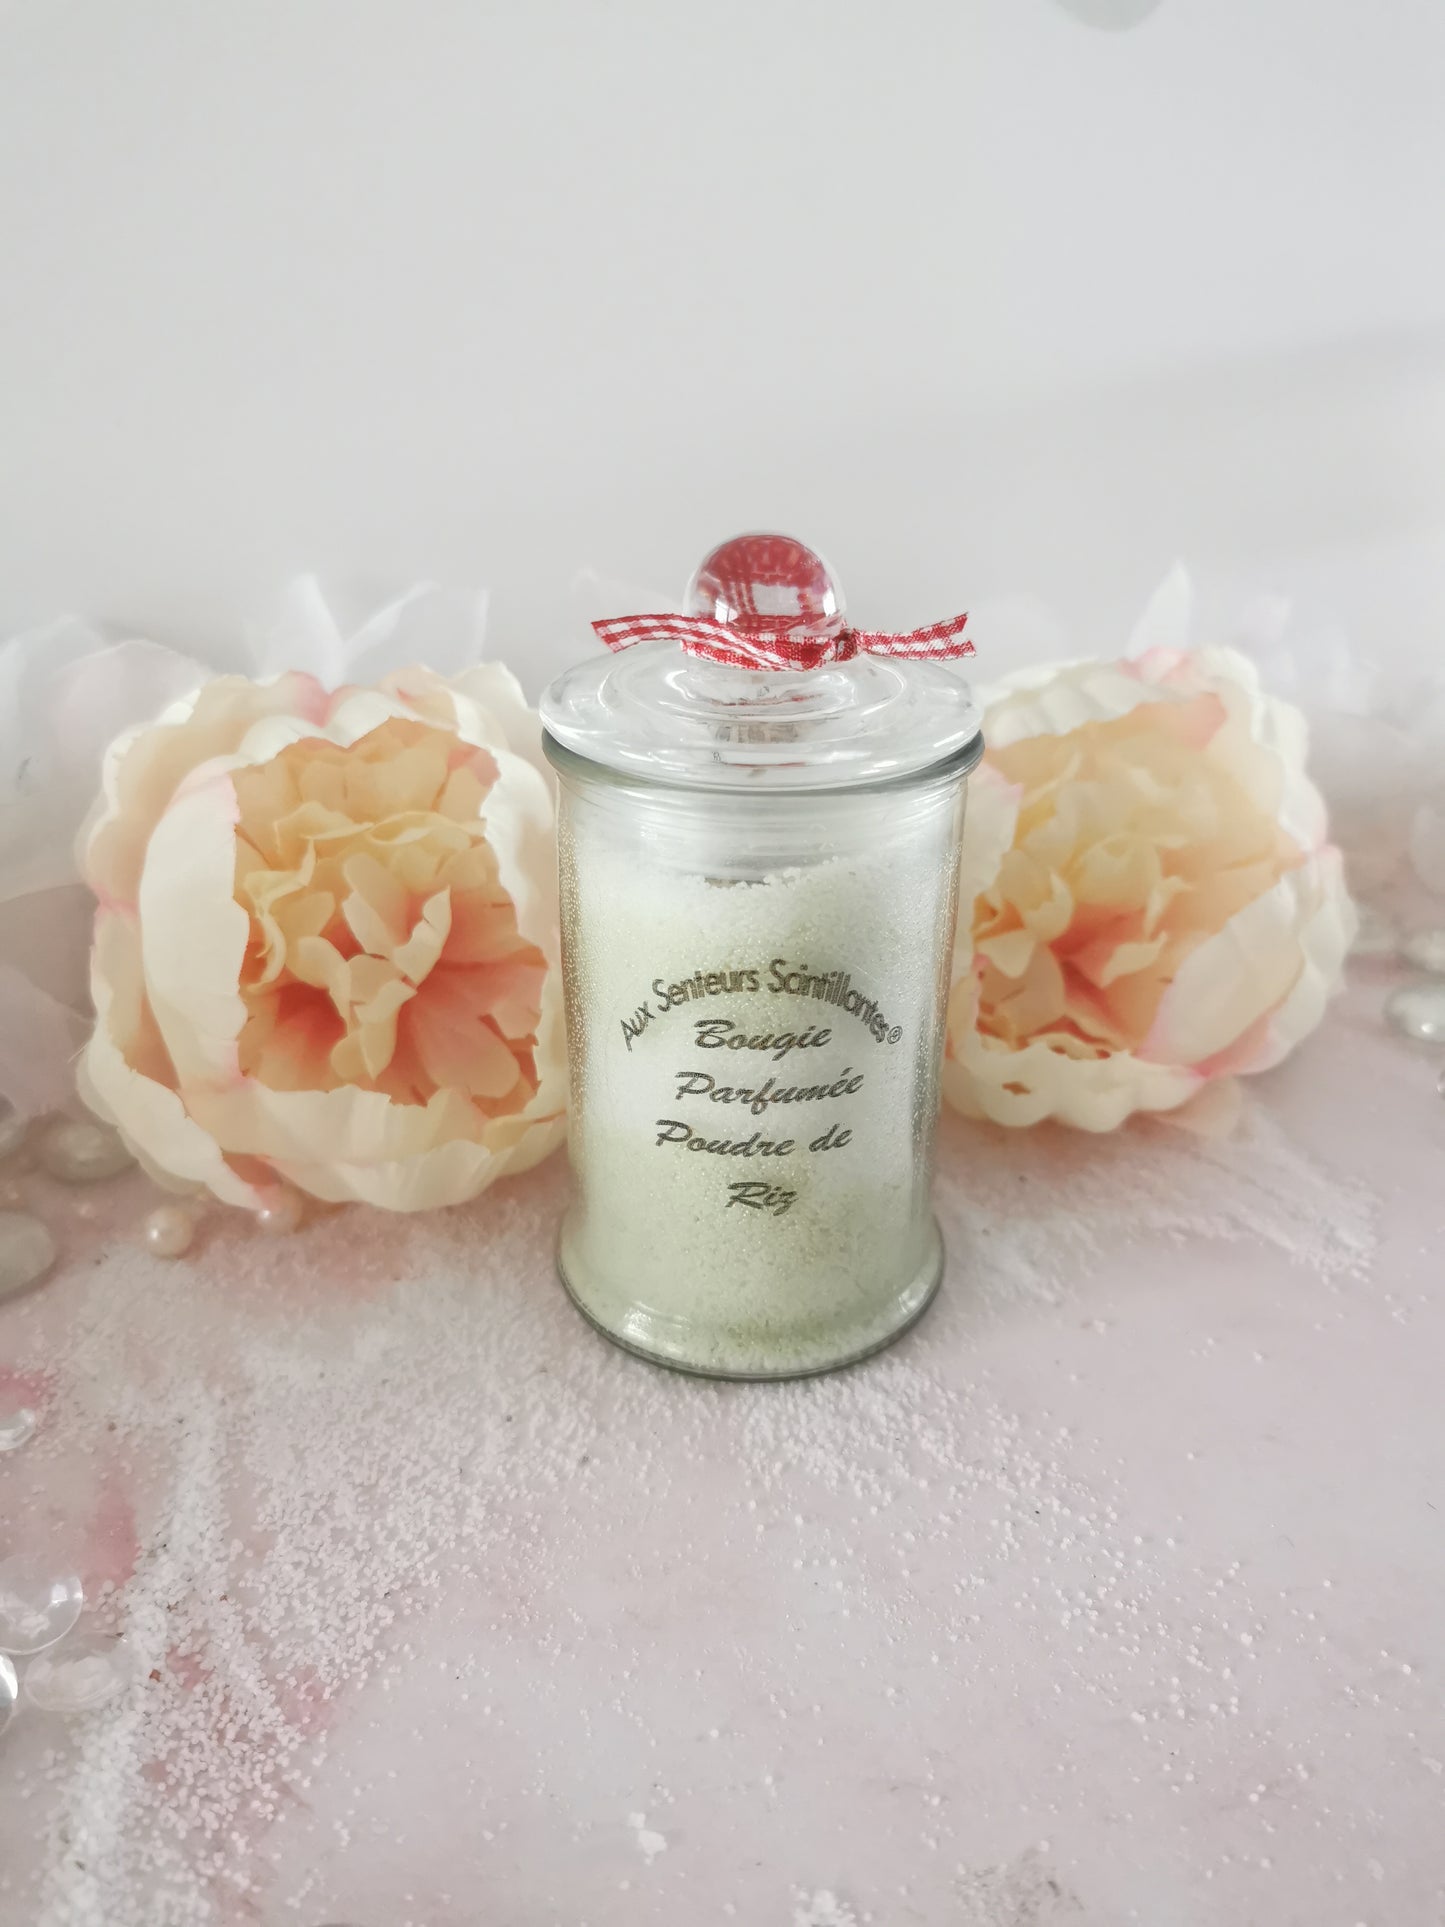 SABLISSIME scented candle “Tender baby” collection